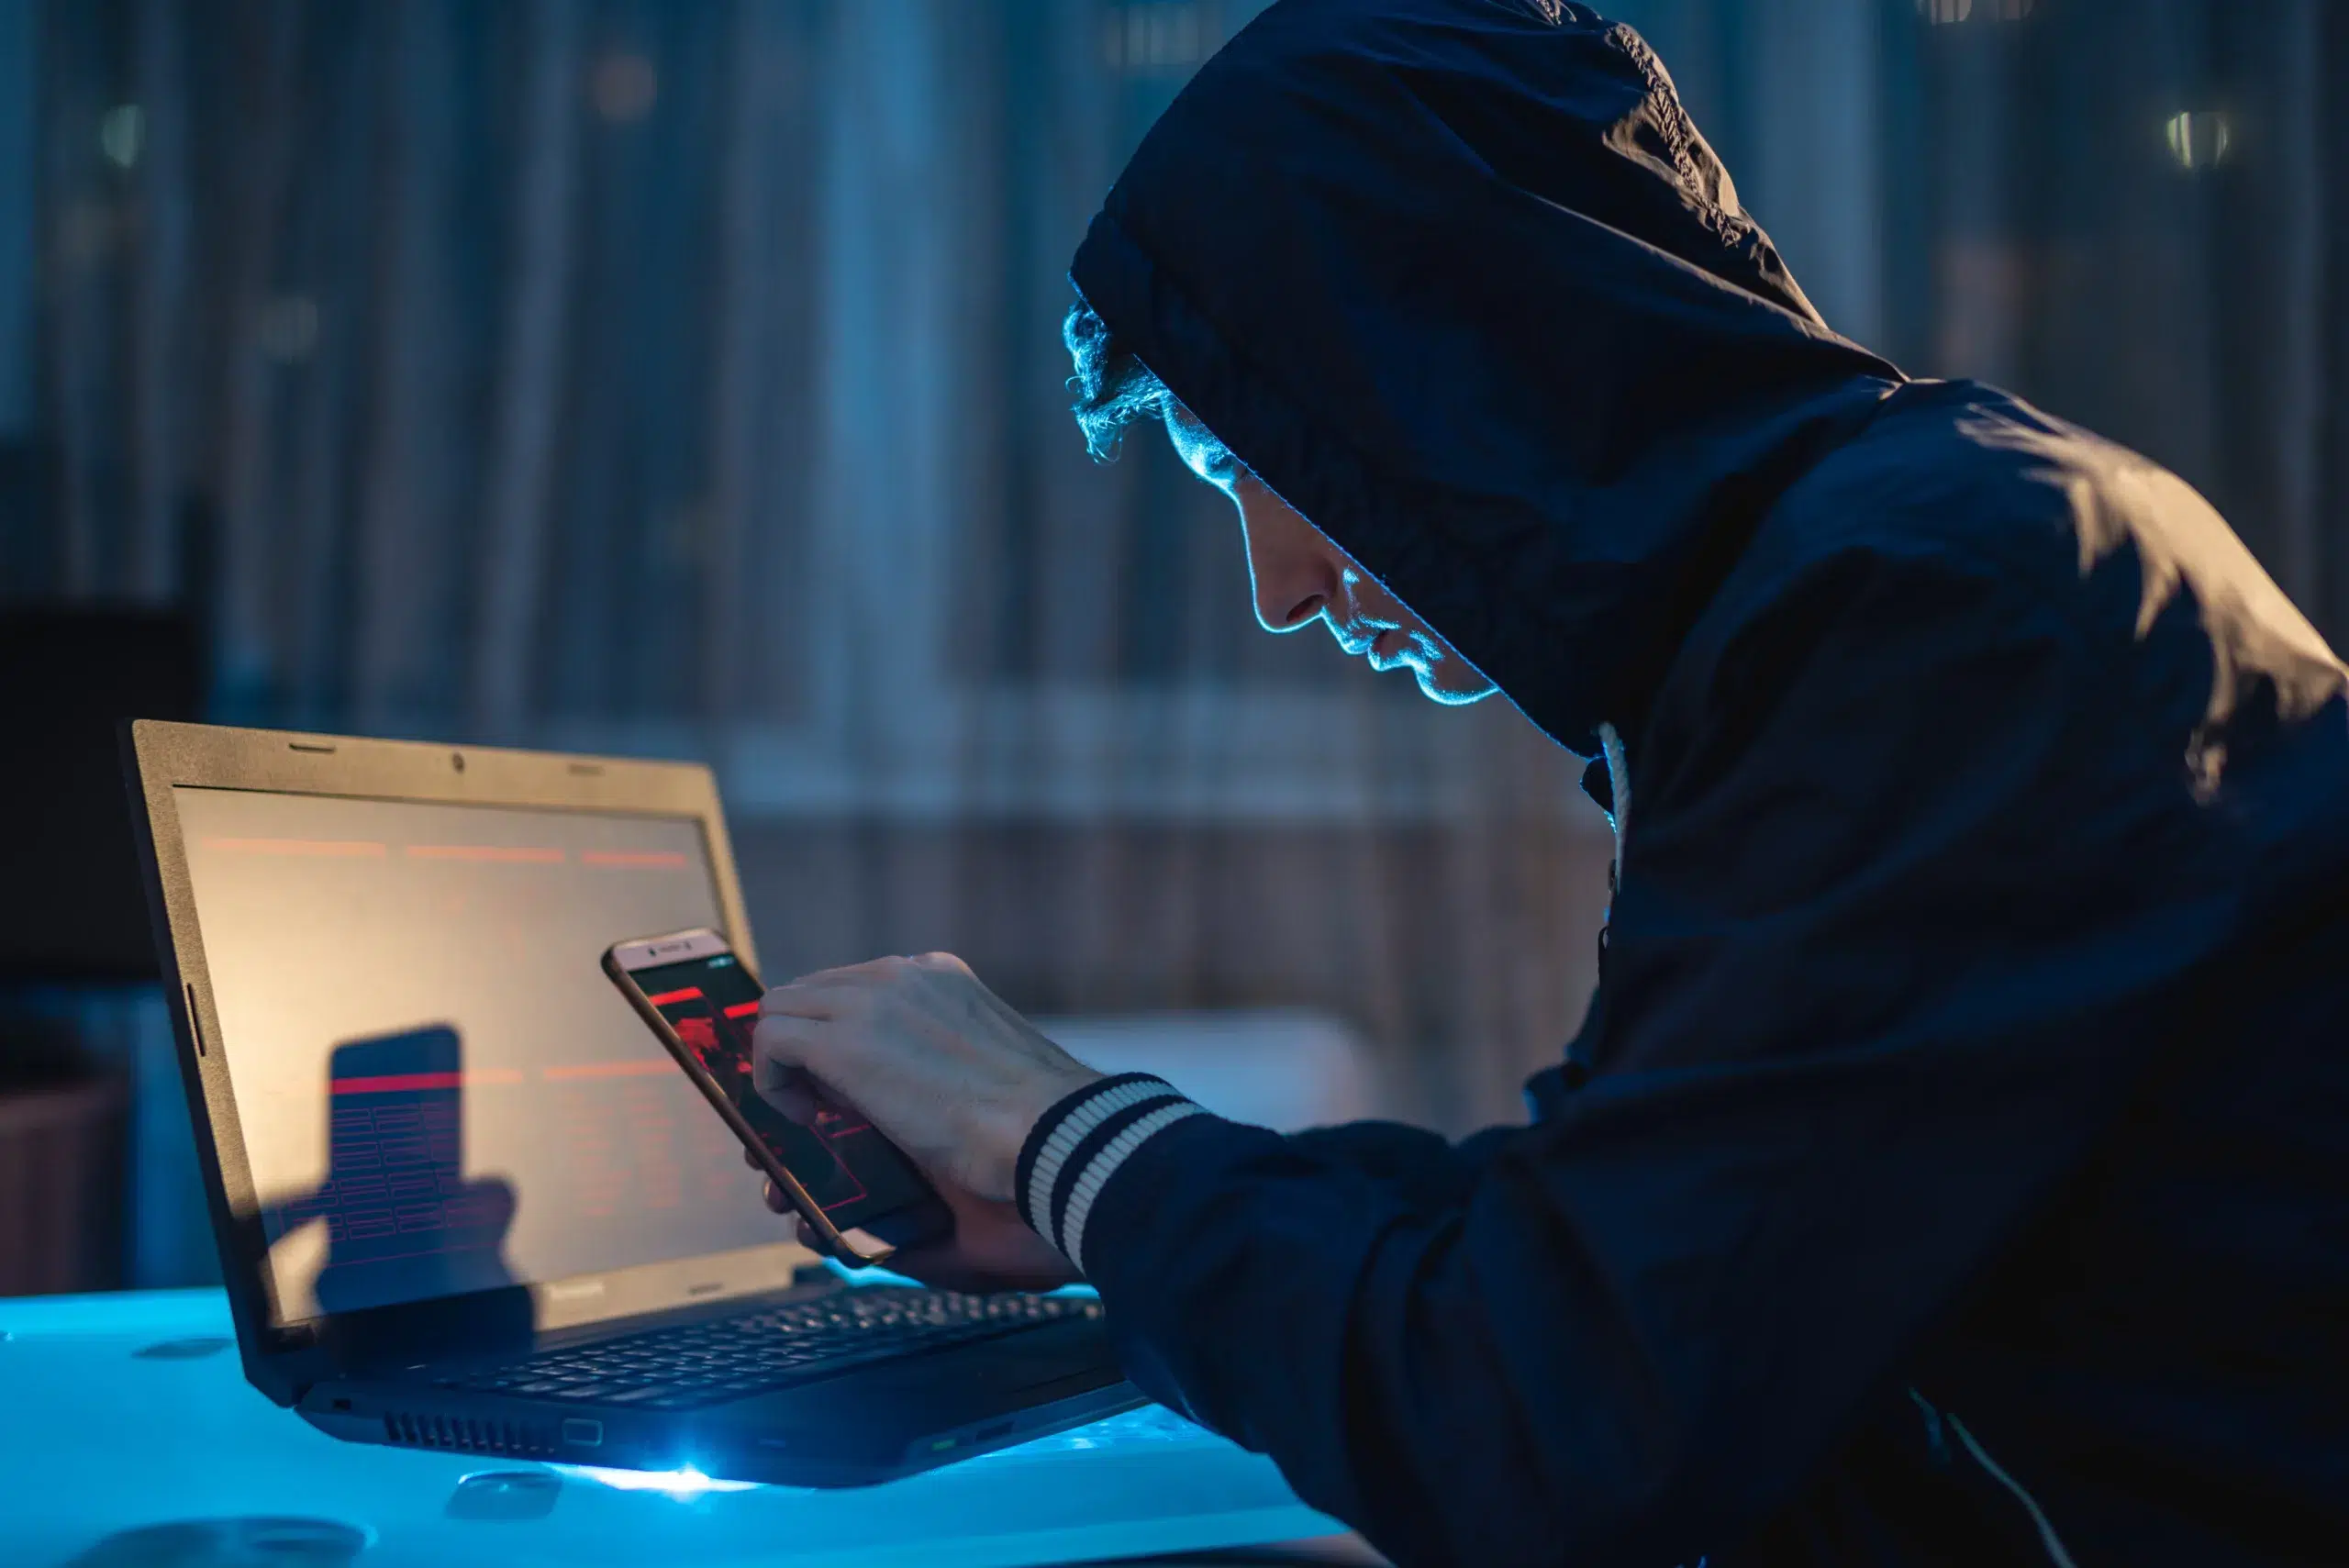 Male hacker in the hood holding the phone in his hands trying to steal access databases with passwords. Cybersecurity